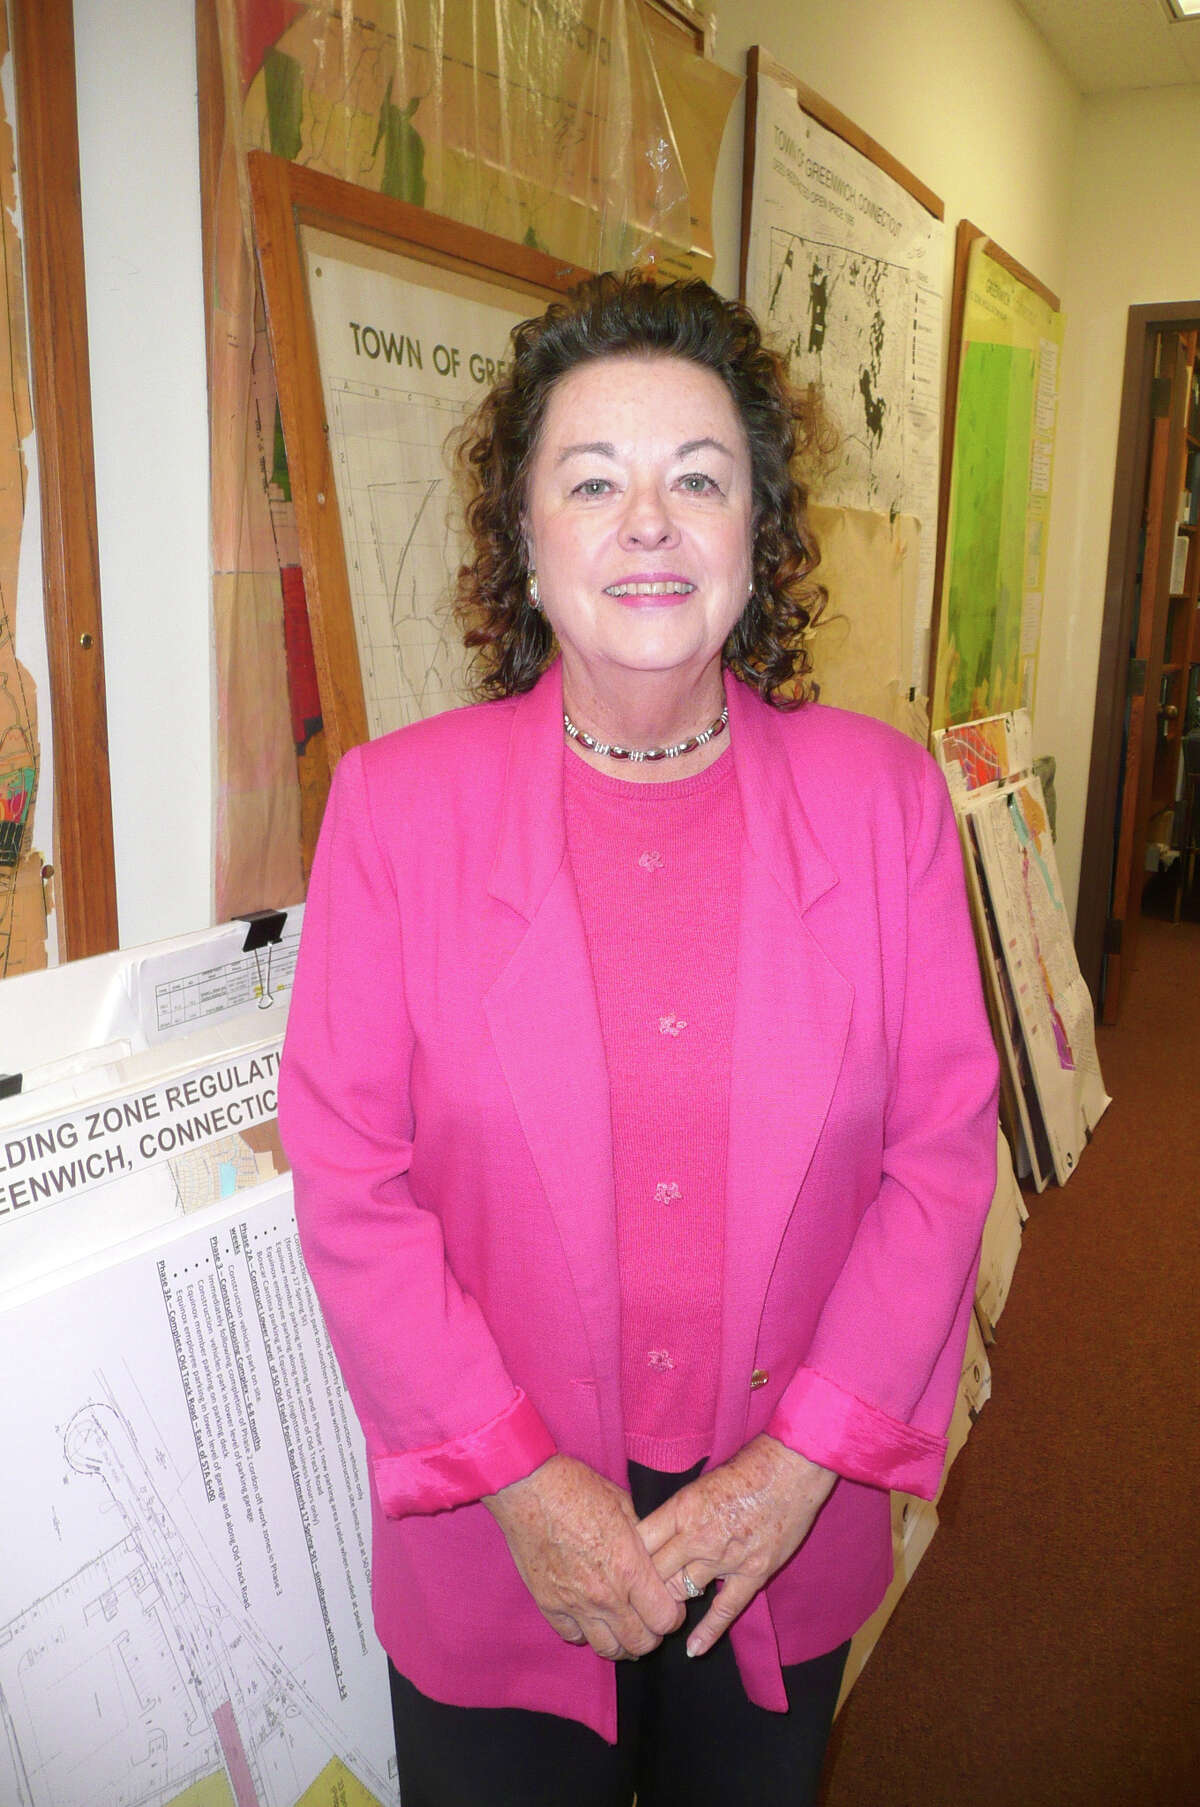 Greenwich Town Planner Diane Fox, above, will be among the panelists as The Friends of the Cos Cob Library host the Annual Cos Cob Town Meeting "An Open Forum to Discuss The Future of Cos Cob," on Monday, April 21 at 7 p.m. in the Community Room of the Cos Cob Library. Other guests will include Peter Berg, of the Cos Cob Neighborhood Association, and Chris von Keyserling, RTM District 8 Representative.